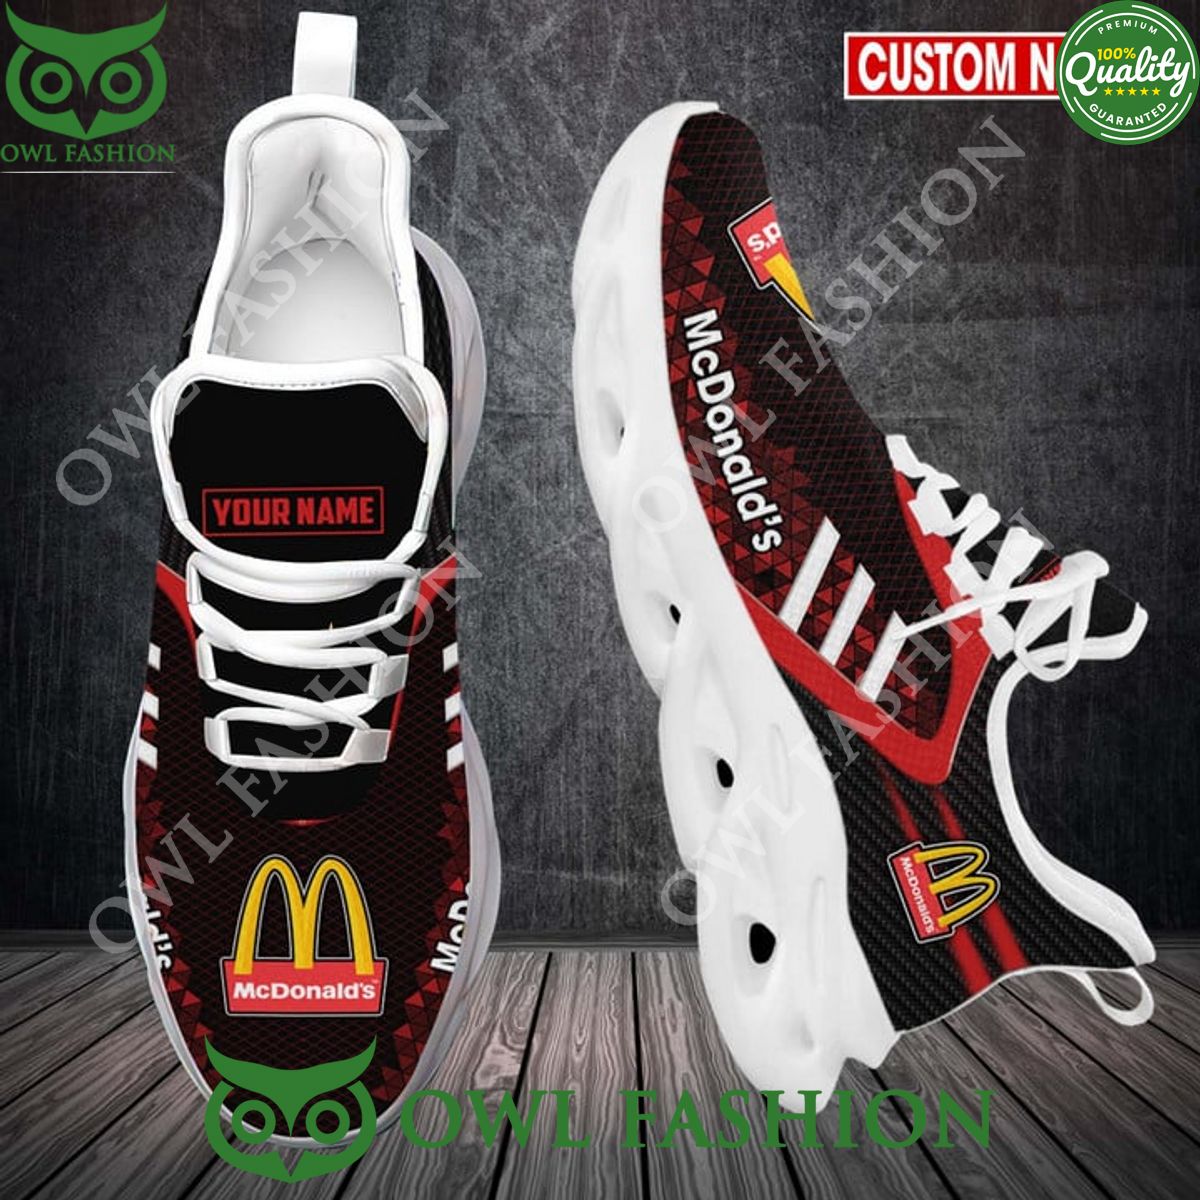 mcdonalds fast food chain red and black clunky max soul sneakers 1 fhOHK.jpg